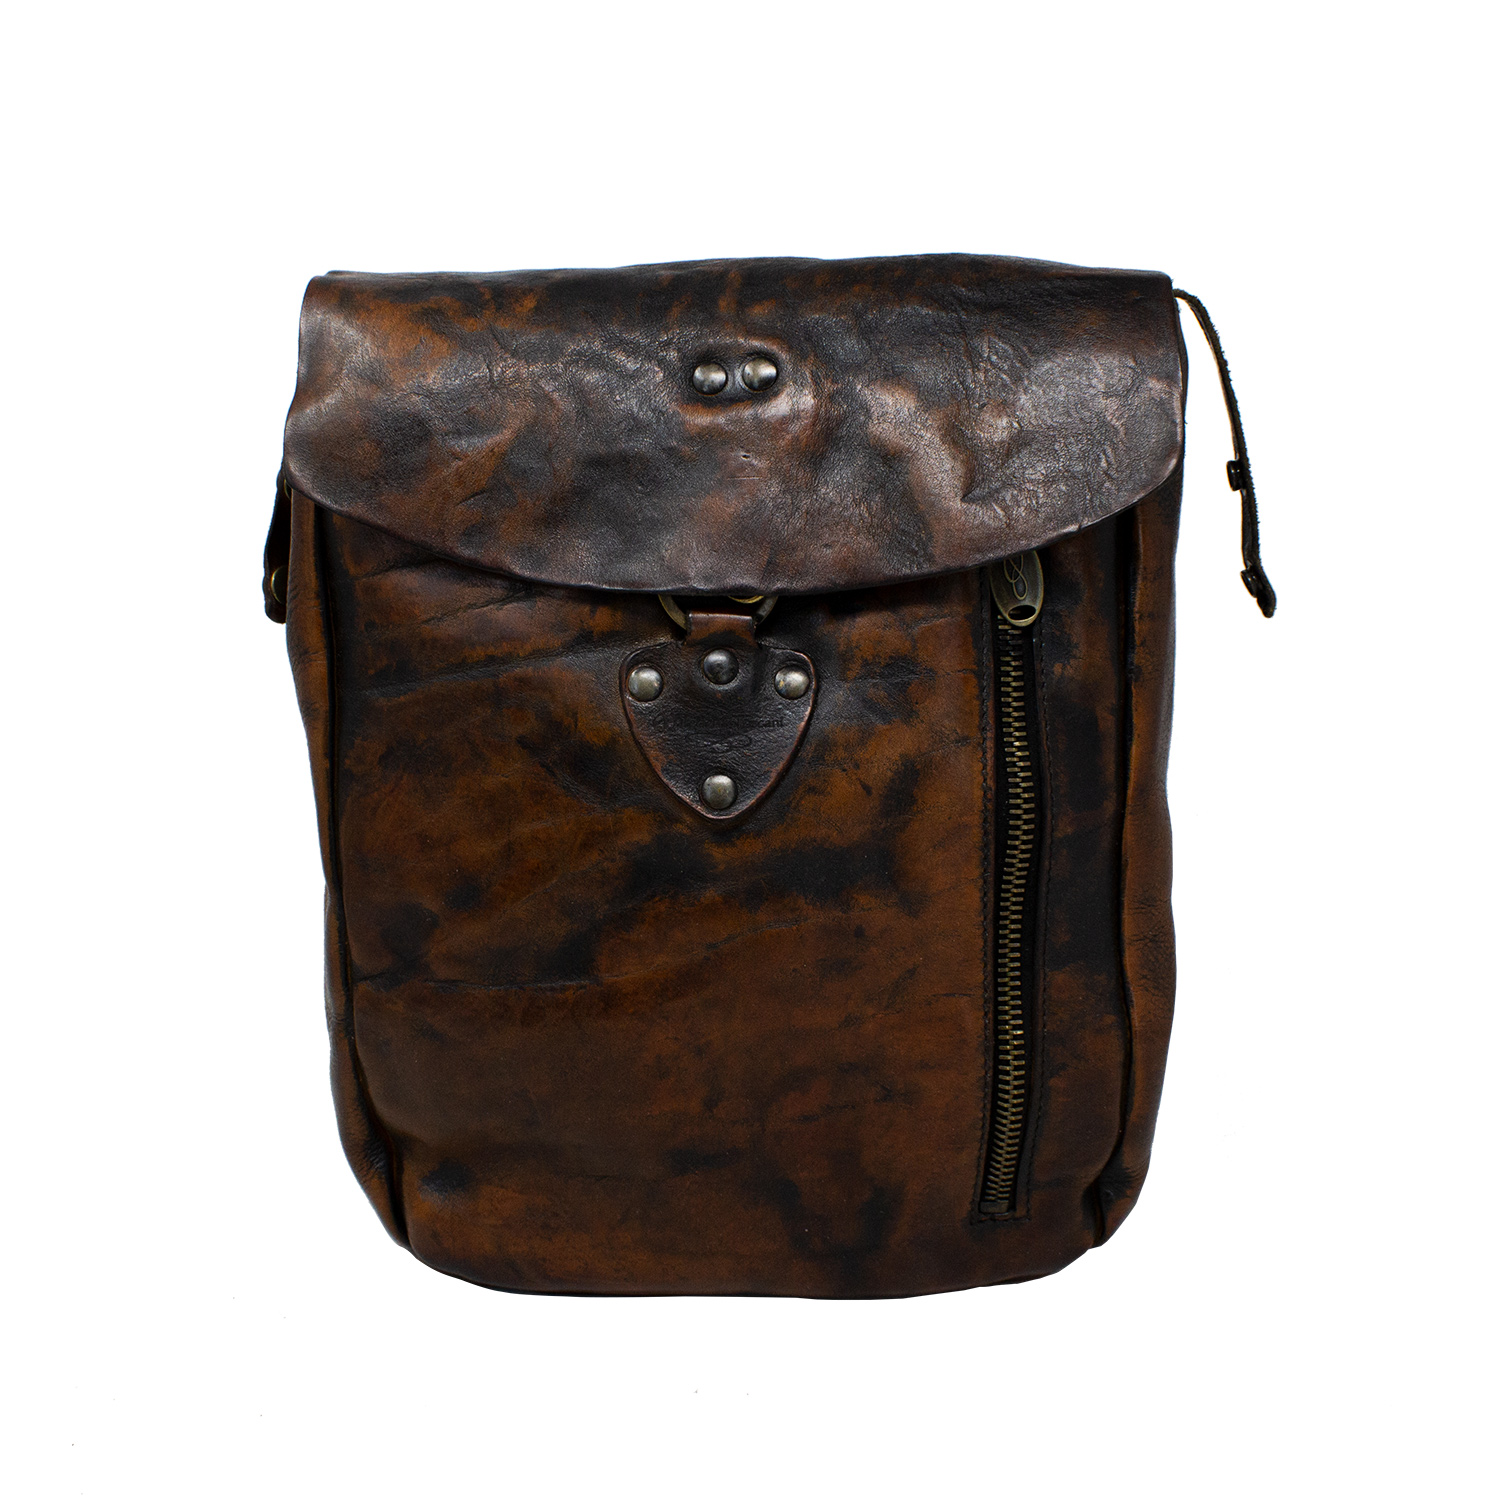 Leather backpack with side zip. The vintage style gives a touch of beauty to your outfit.